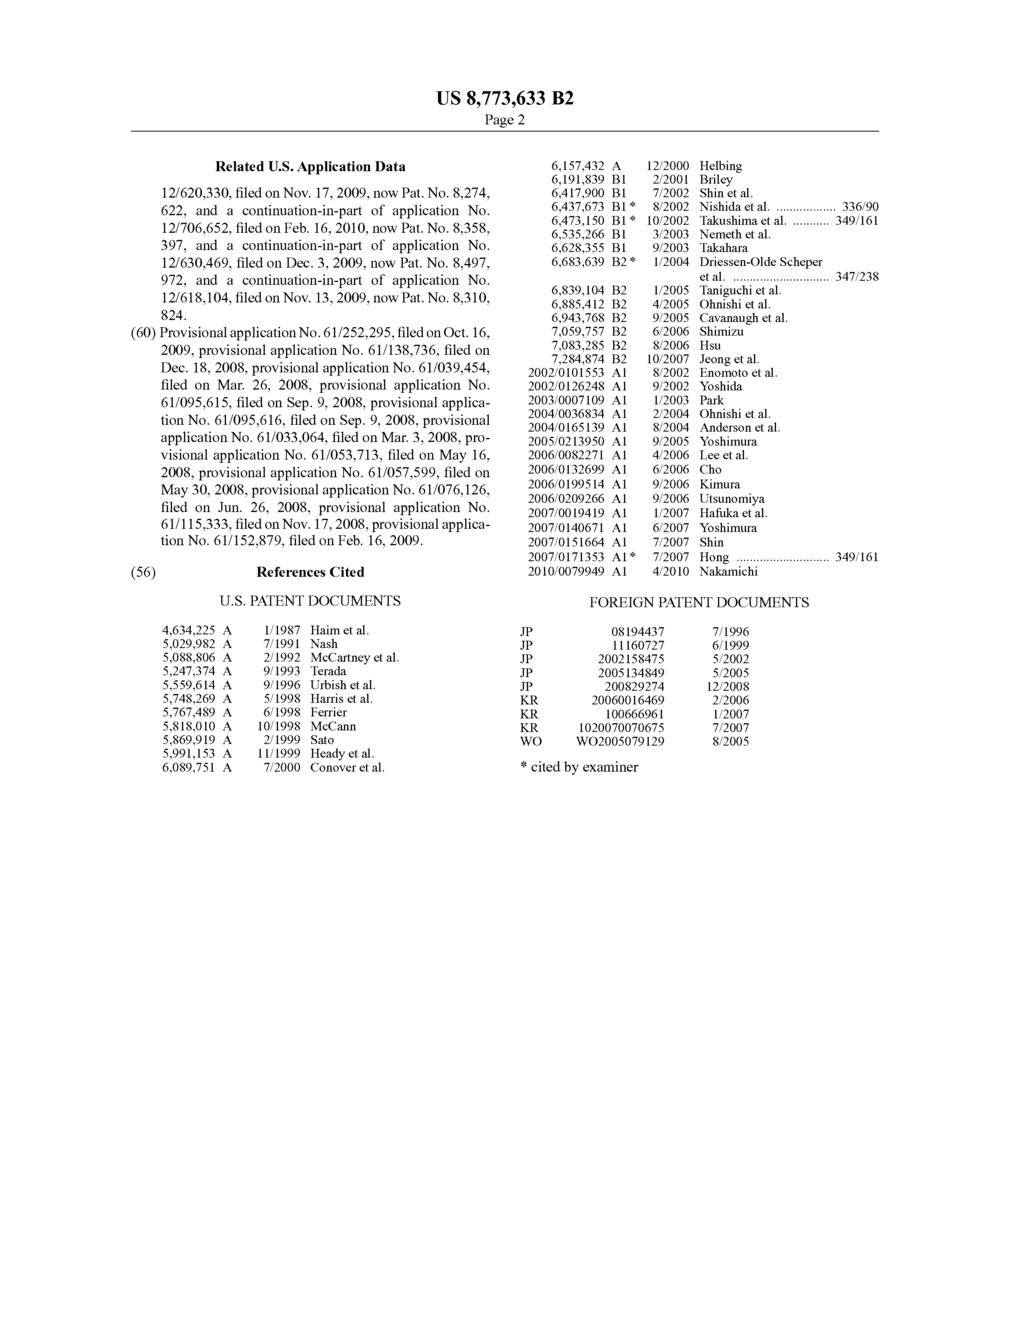 US 8,773.633 B2 Page 2 Related U.S. Application Data 12/620,330, filed on Nov. 17, 2009, now Pat. No. 8,274, 622, and a continuation-in-part of application No. 12/706,652, filed on Feb.